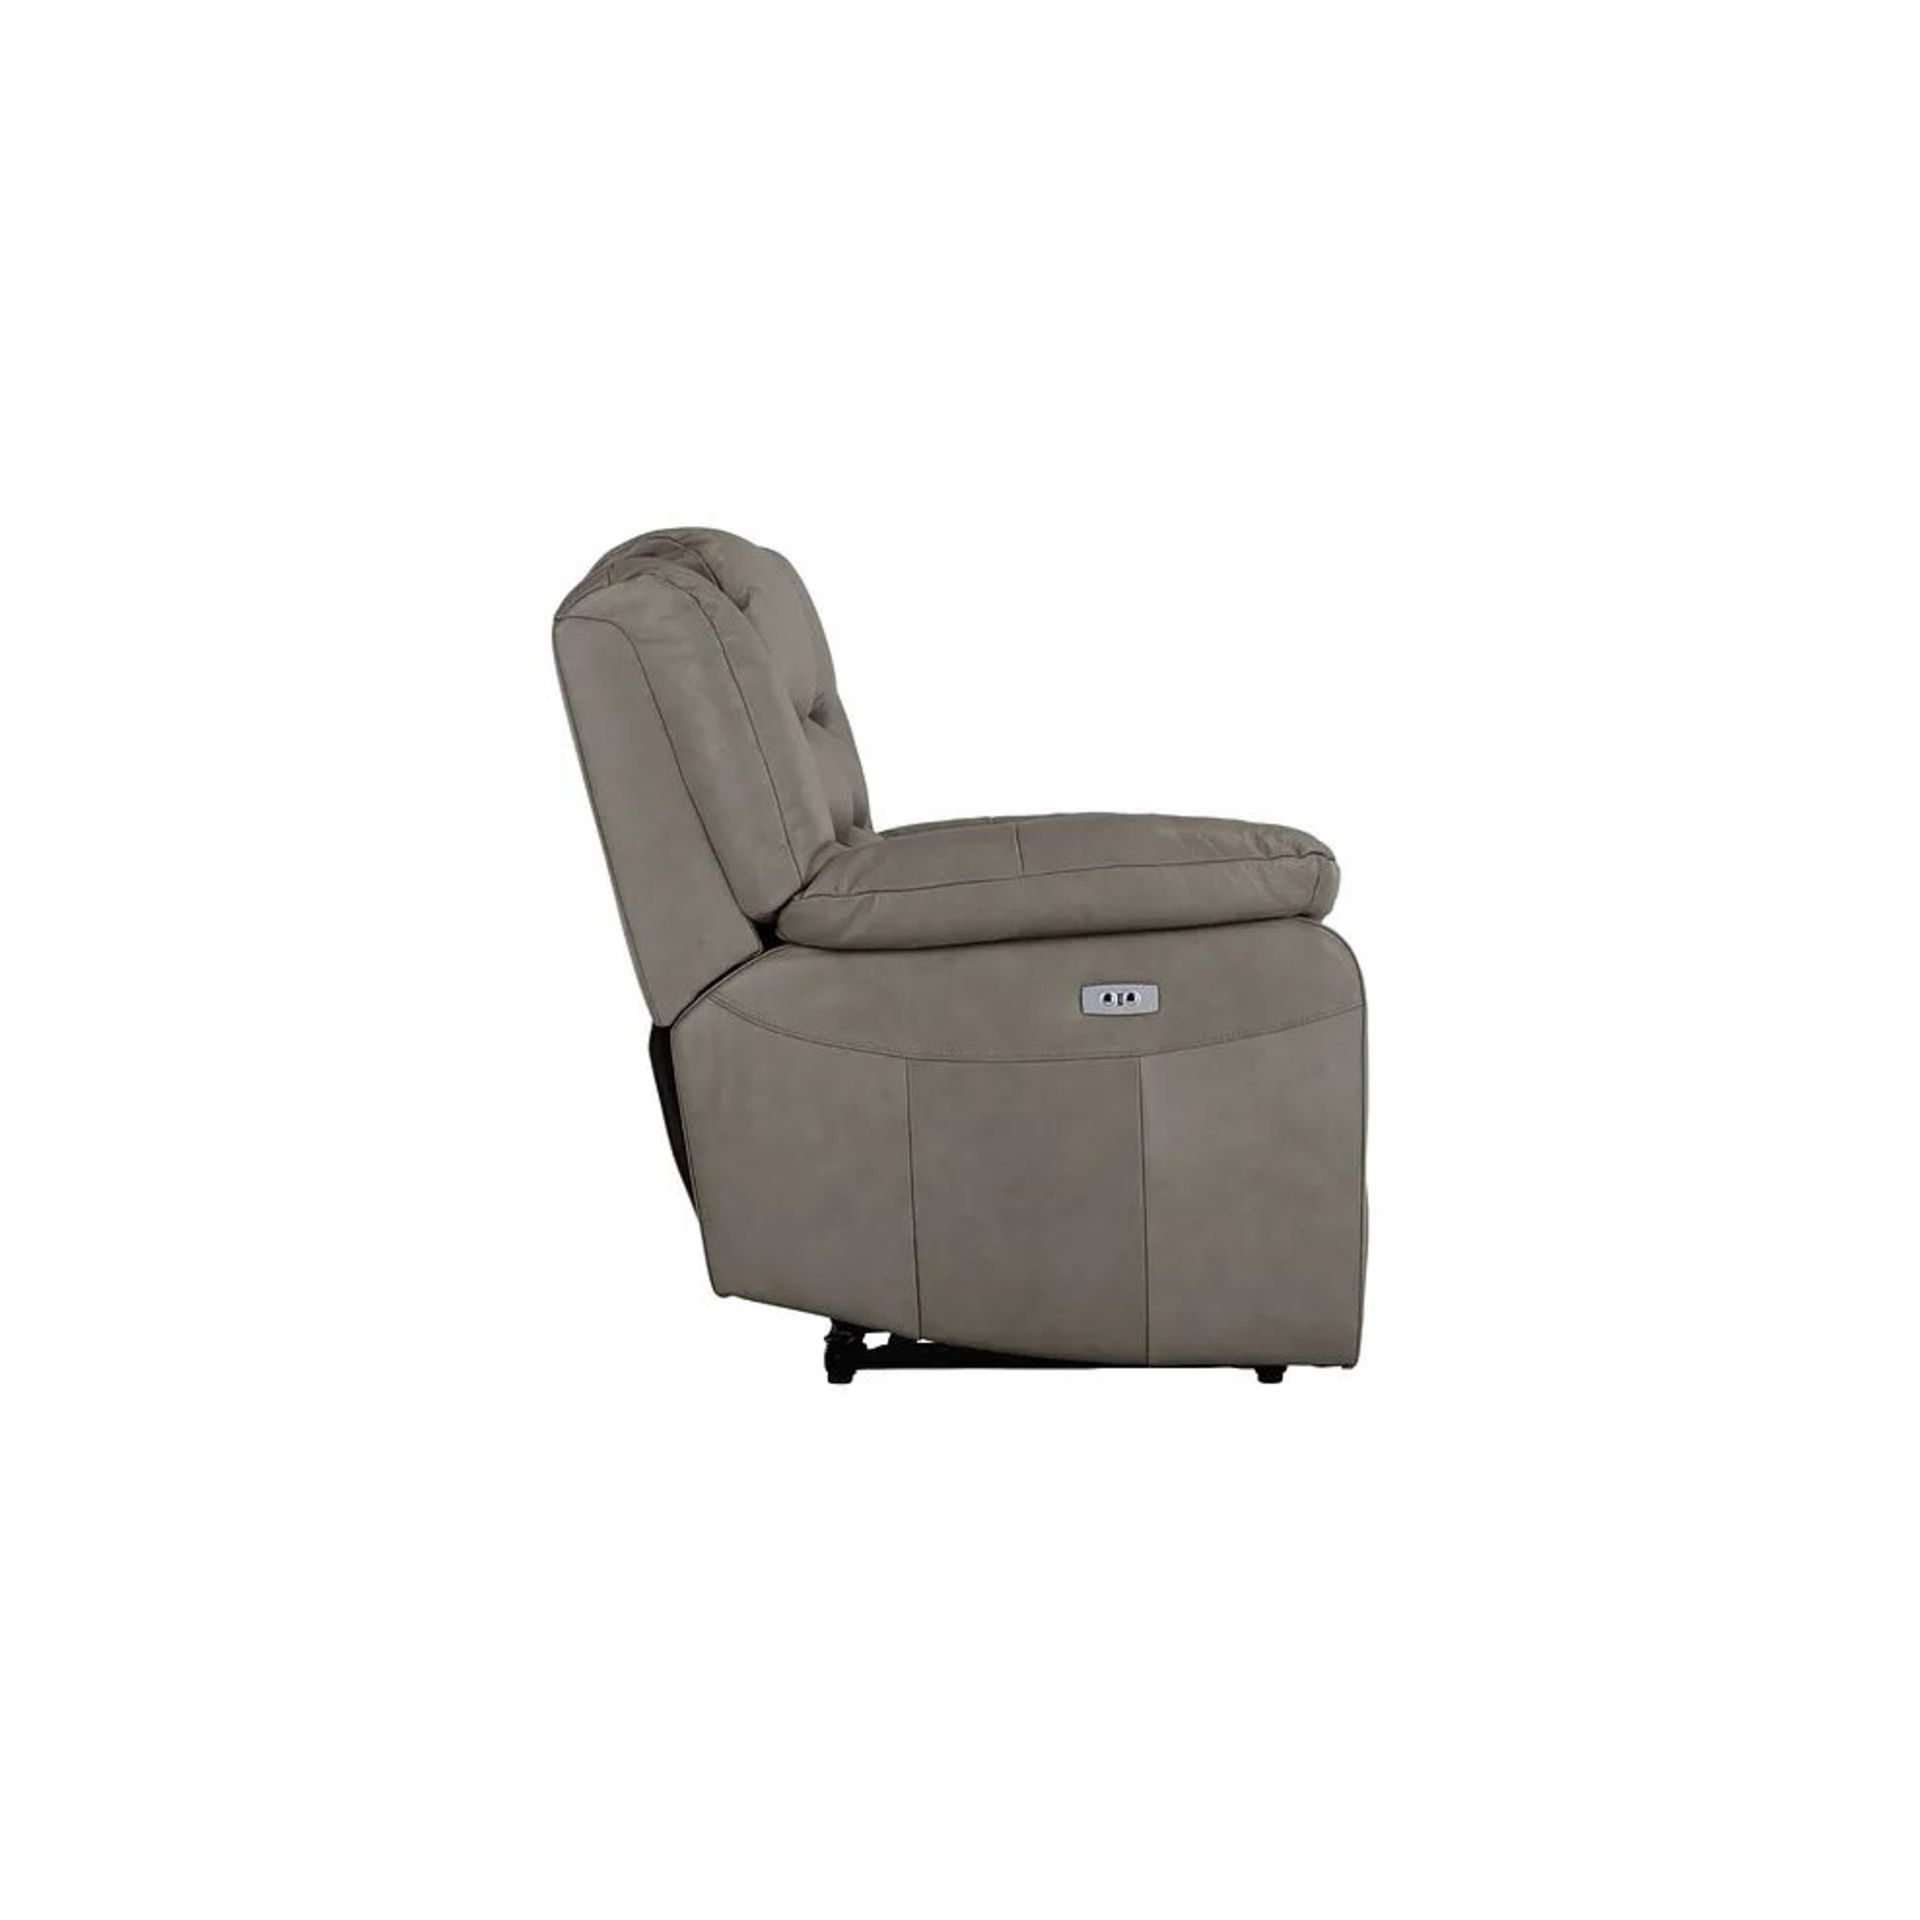 BRAND NEW MARLOW 3 Seater Electric Recliner Sofa - DARK GREY LEATHER. RRP £1849. Our Marlow - Image 7 of 11